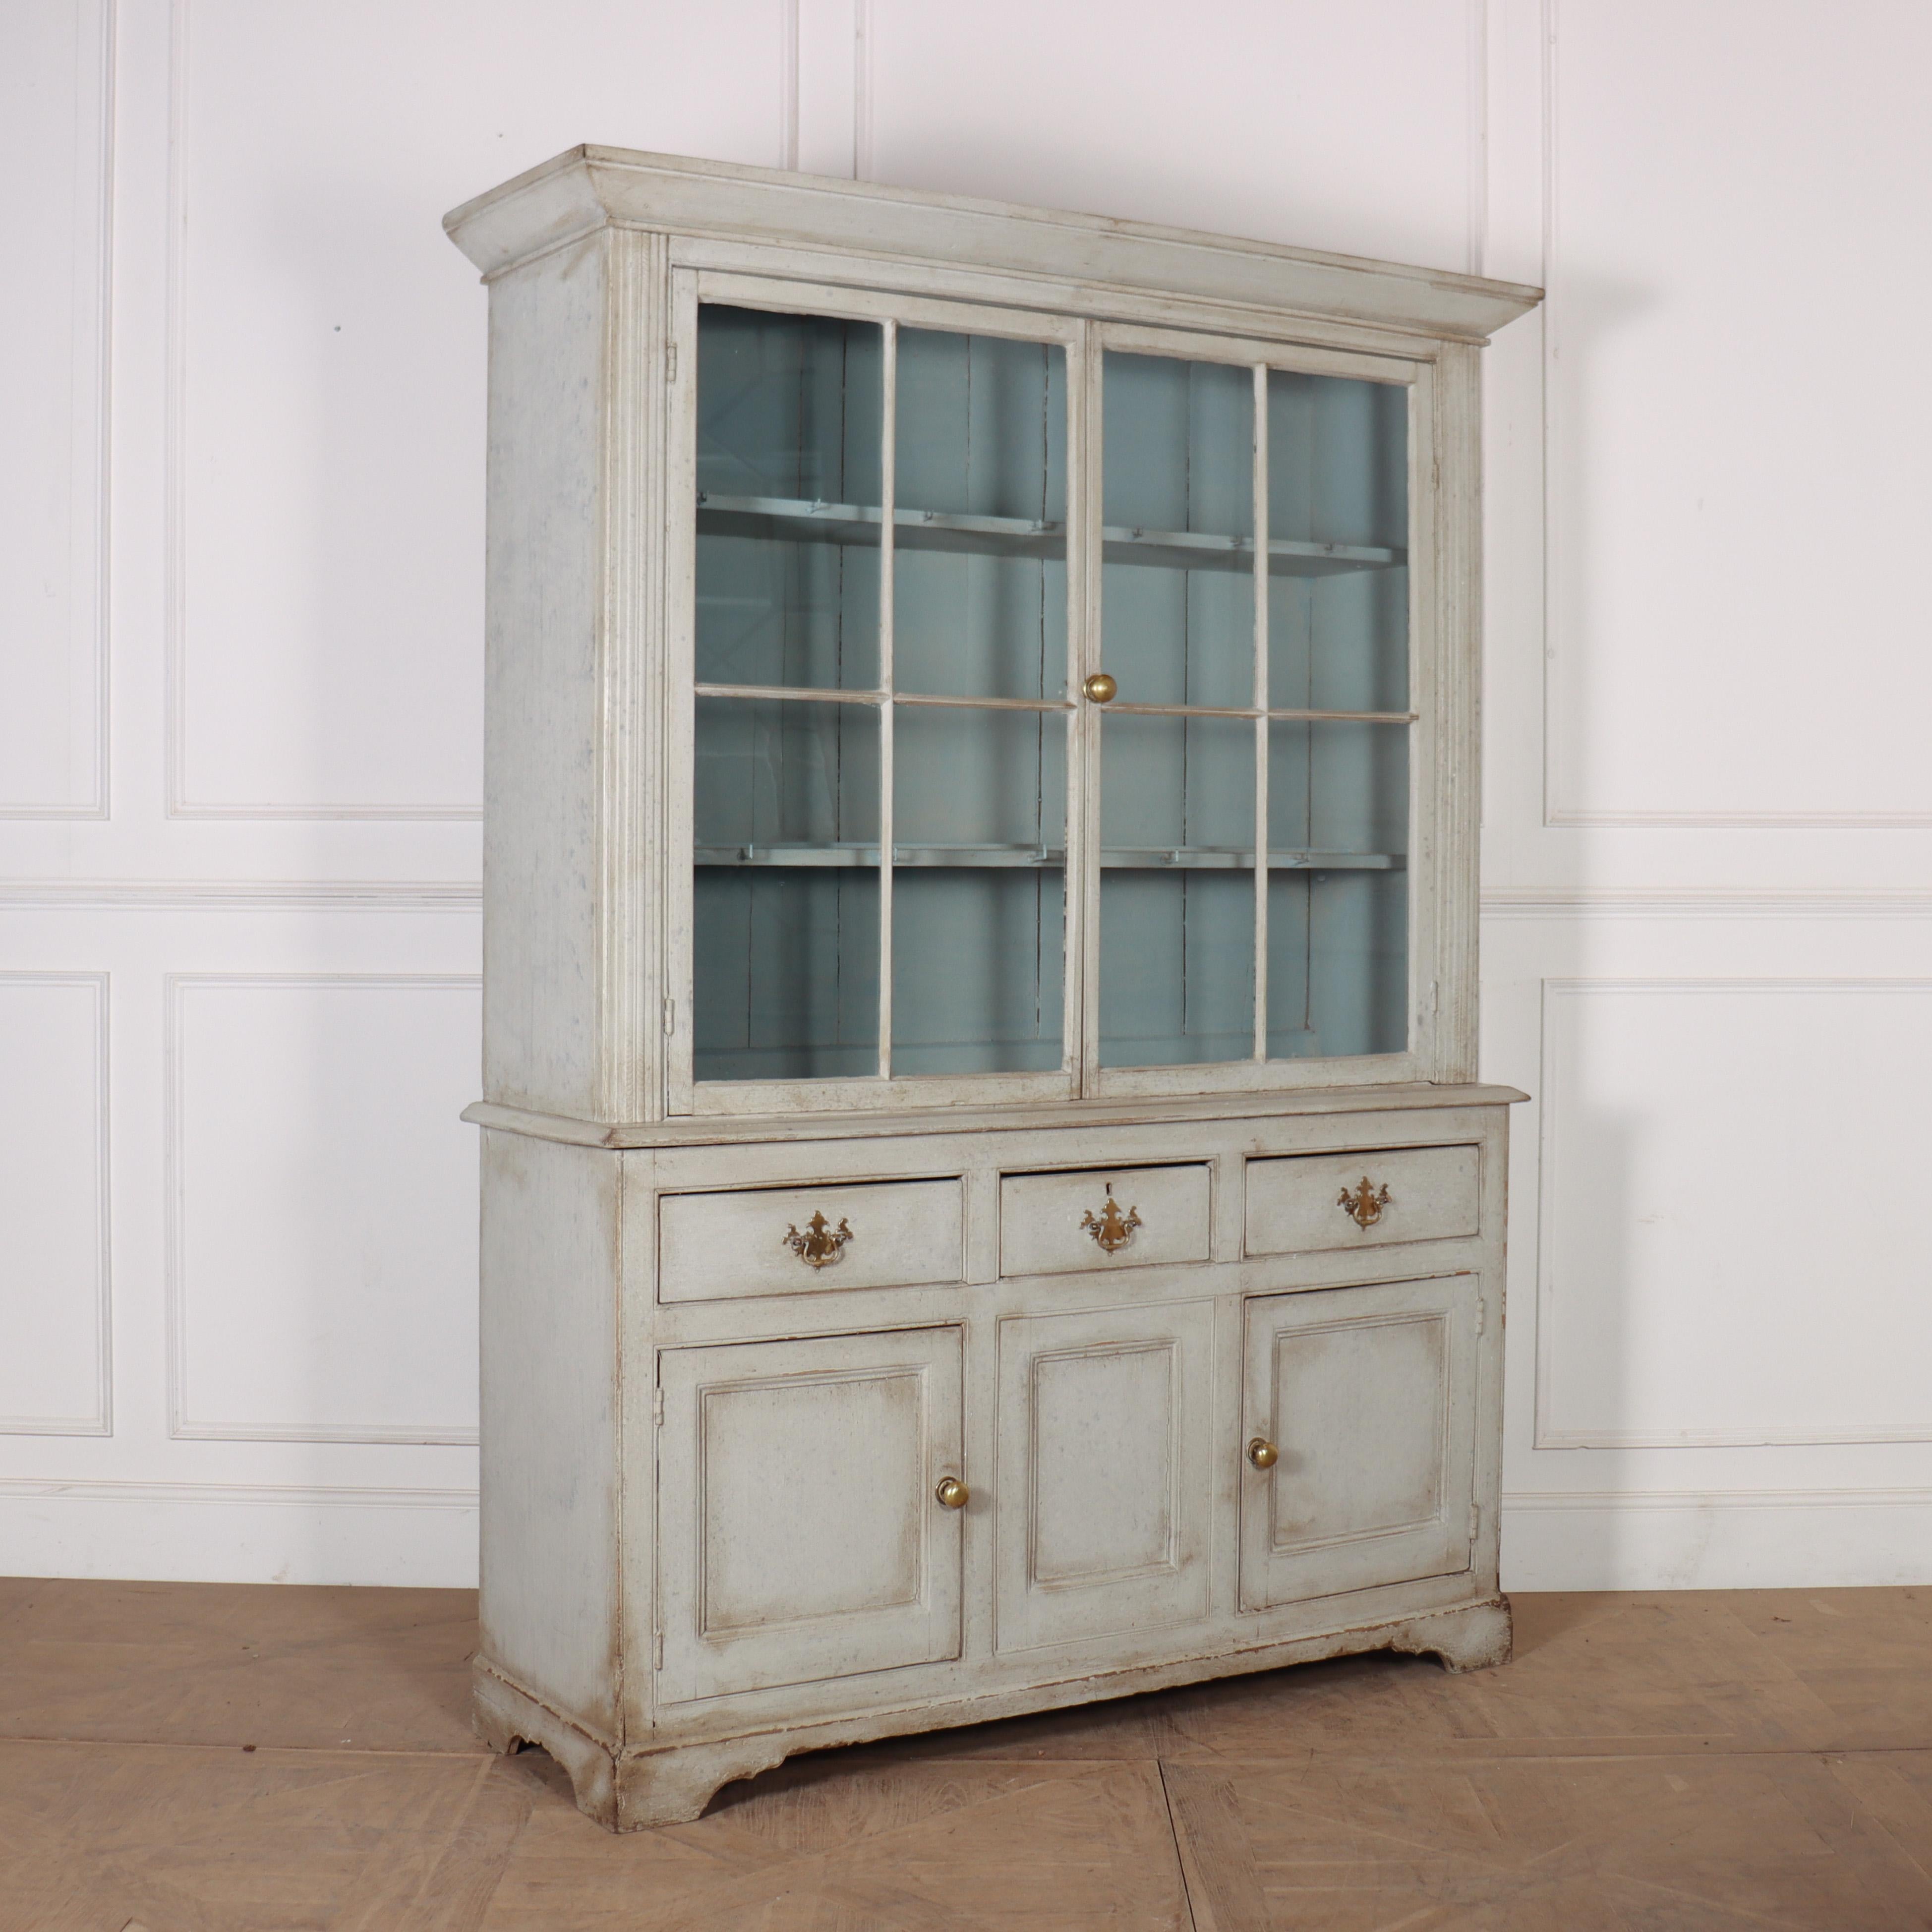 Pretty early 19th C West Country glazed and painted pine dresser. 1810.

Reference: 7956

Dimensions
64 inches (163 cms) Wide
19.5 inches (50 cms) Deep
84.5 inches (215 cms) High